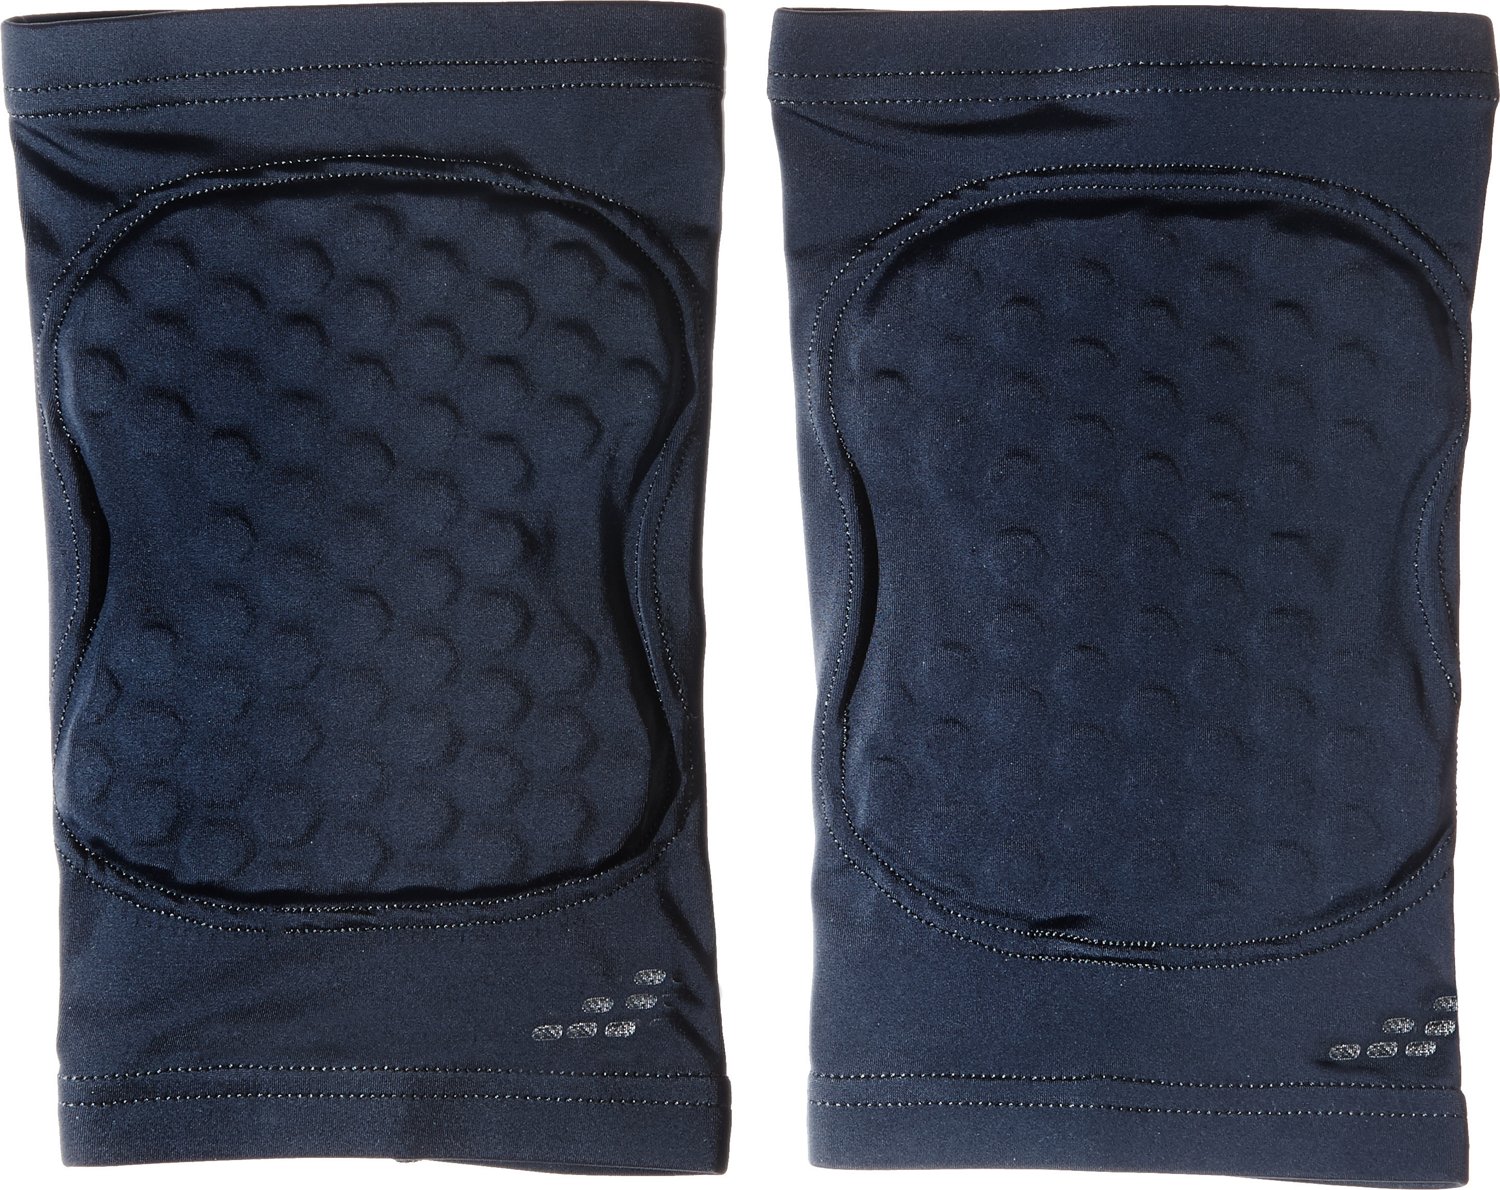 Buy The Fearless Basketball Knee Pads Basketball Gauntlets